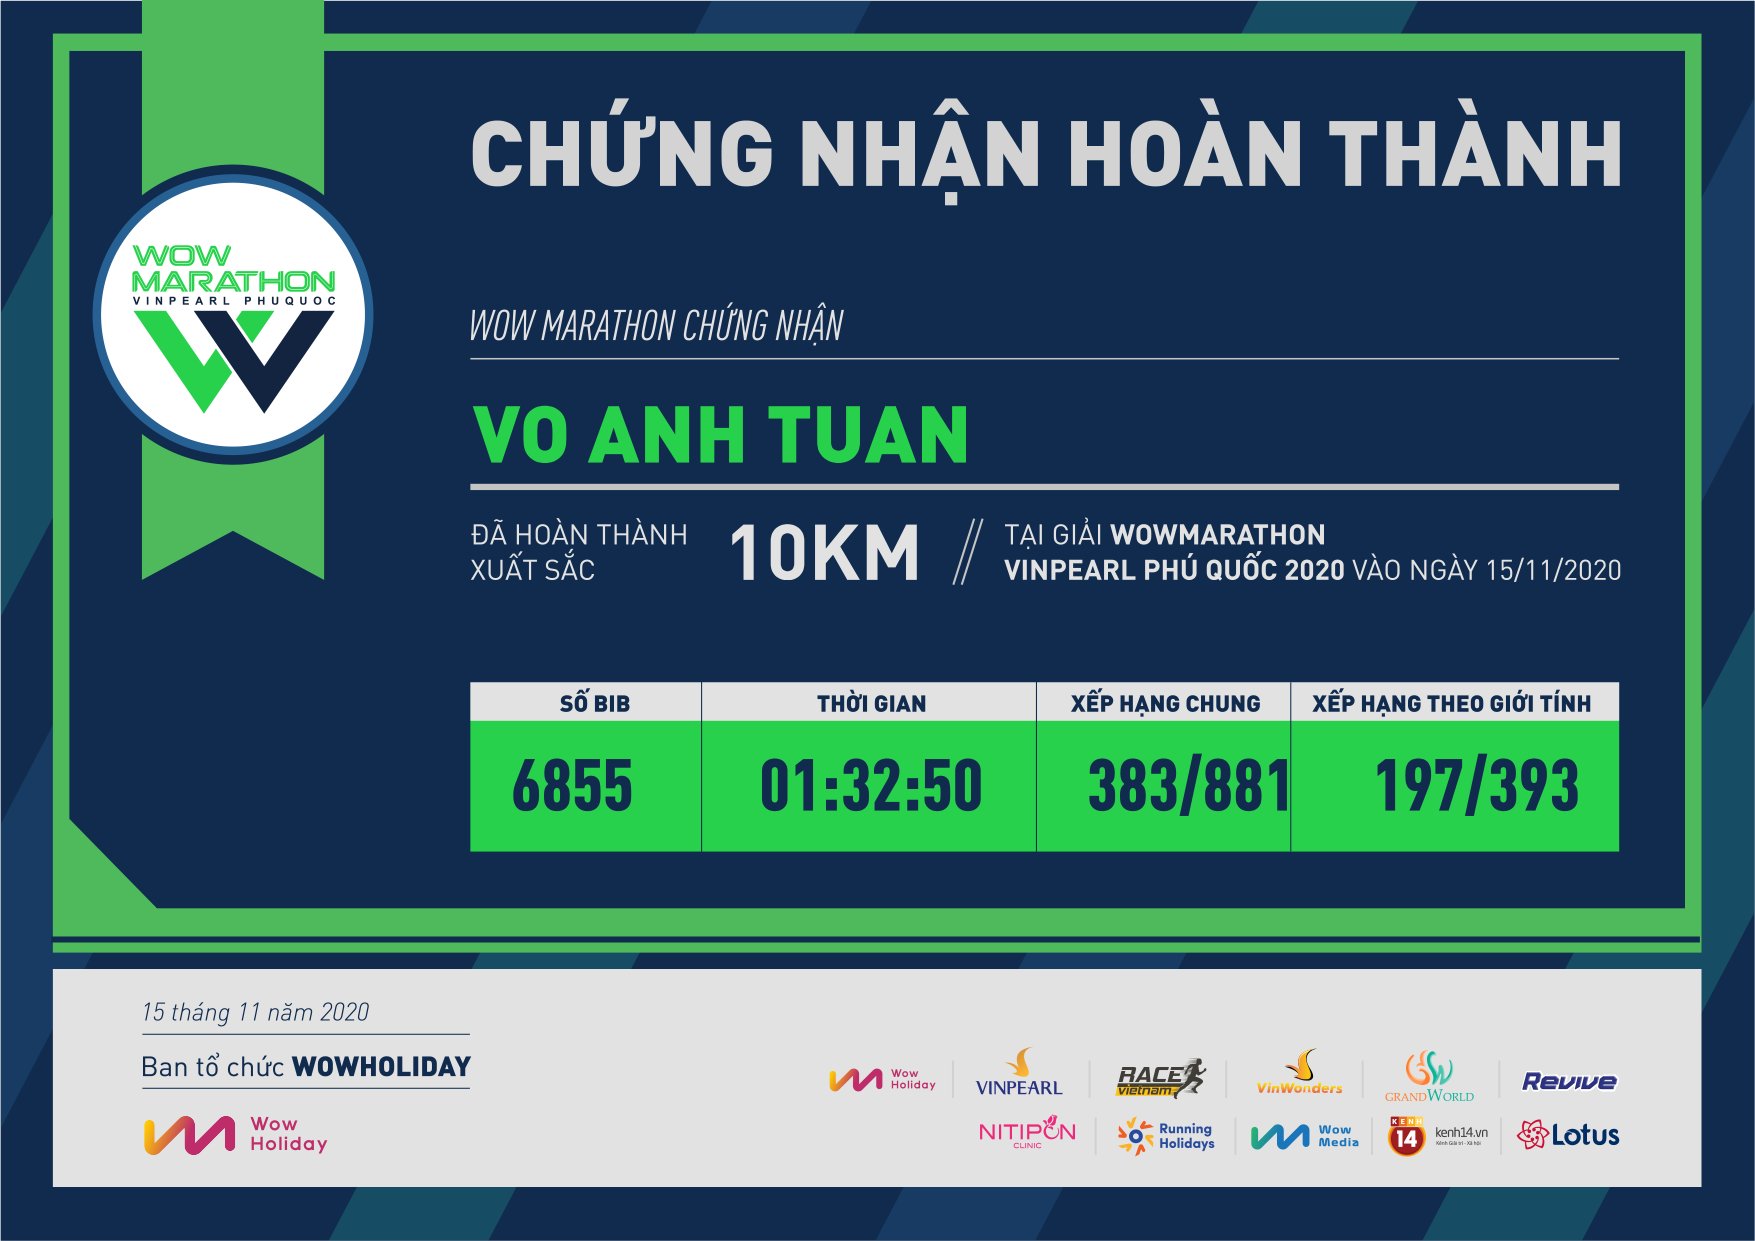 6855 - Vo Anh Tuan